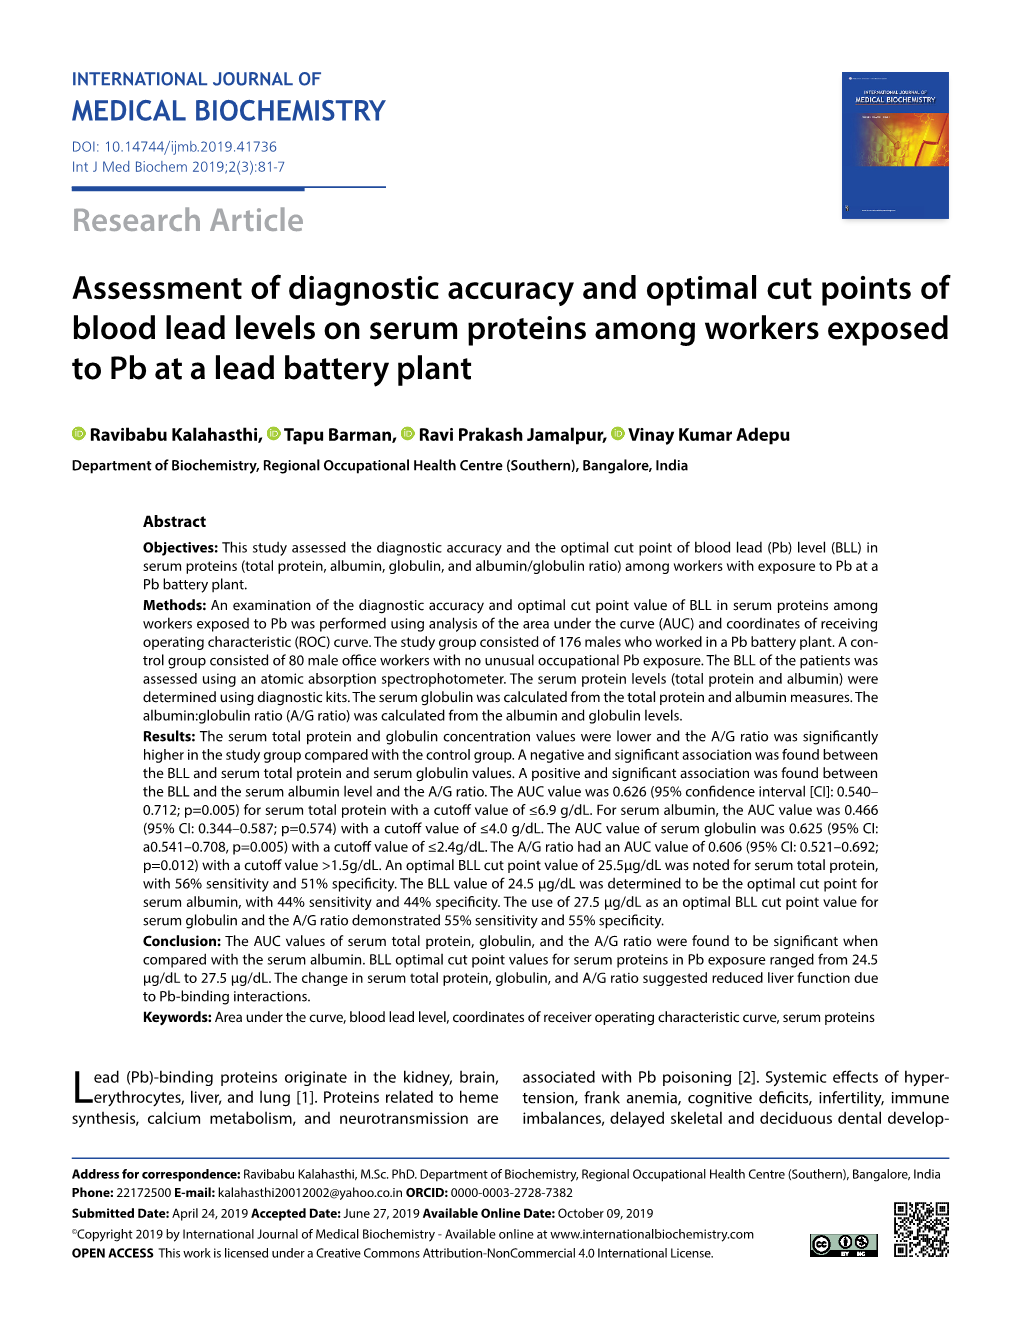 Research Article Assessment of Diagnostic Accuracy and Optimal Cut Points of Blood Lead Levels on Serum Proteins Among Workers E